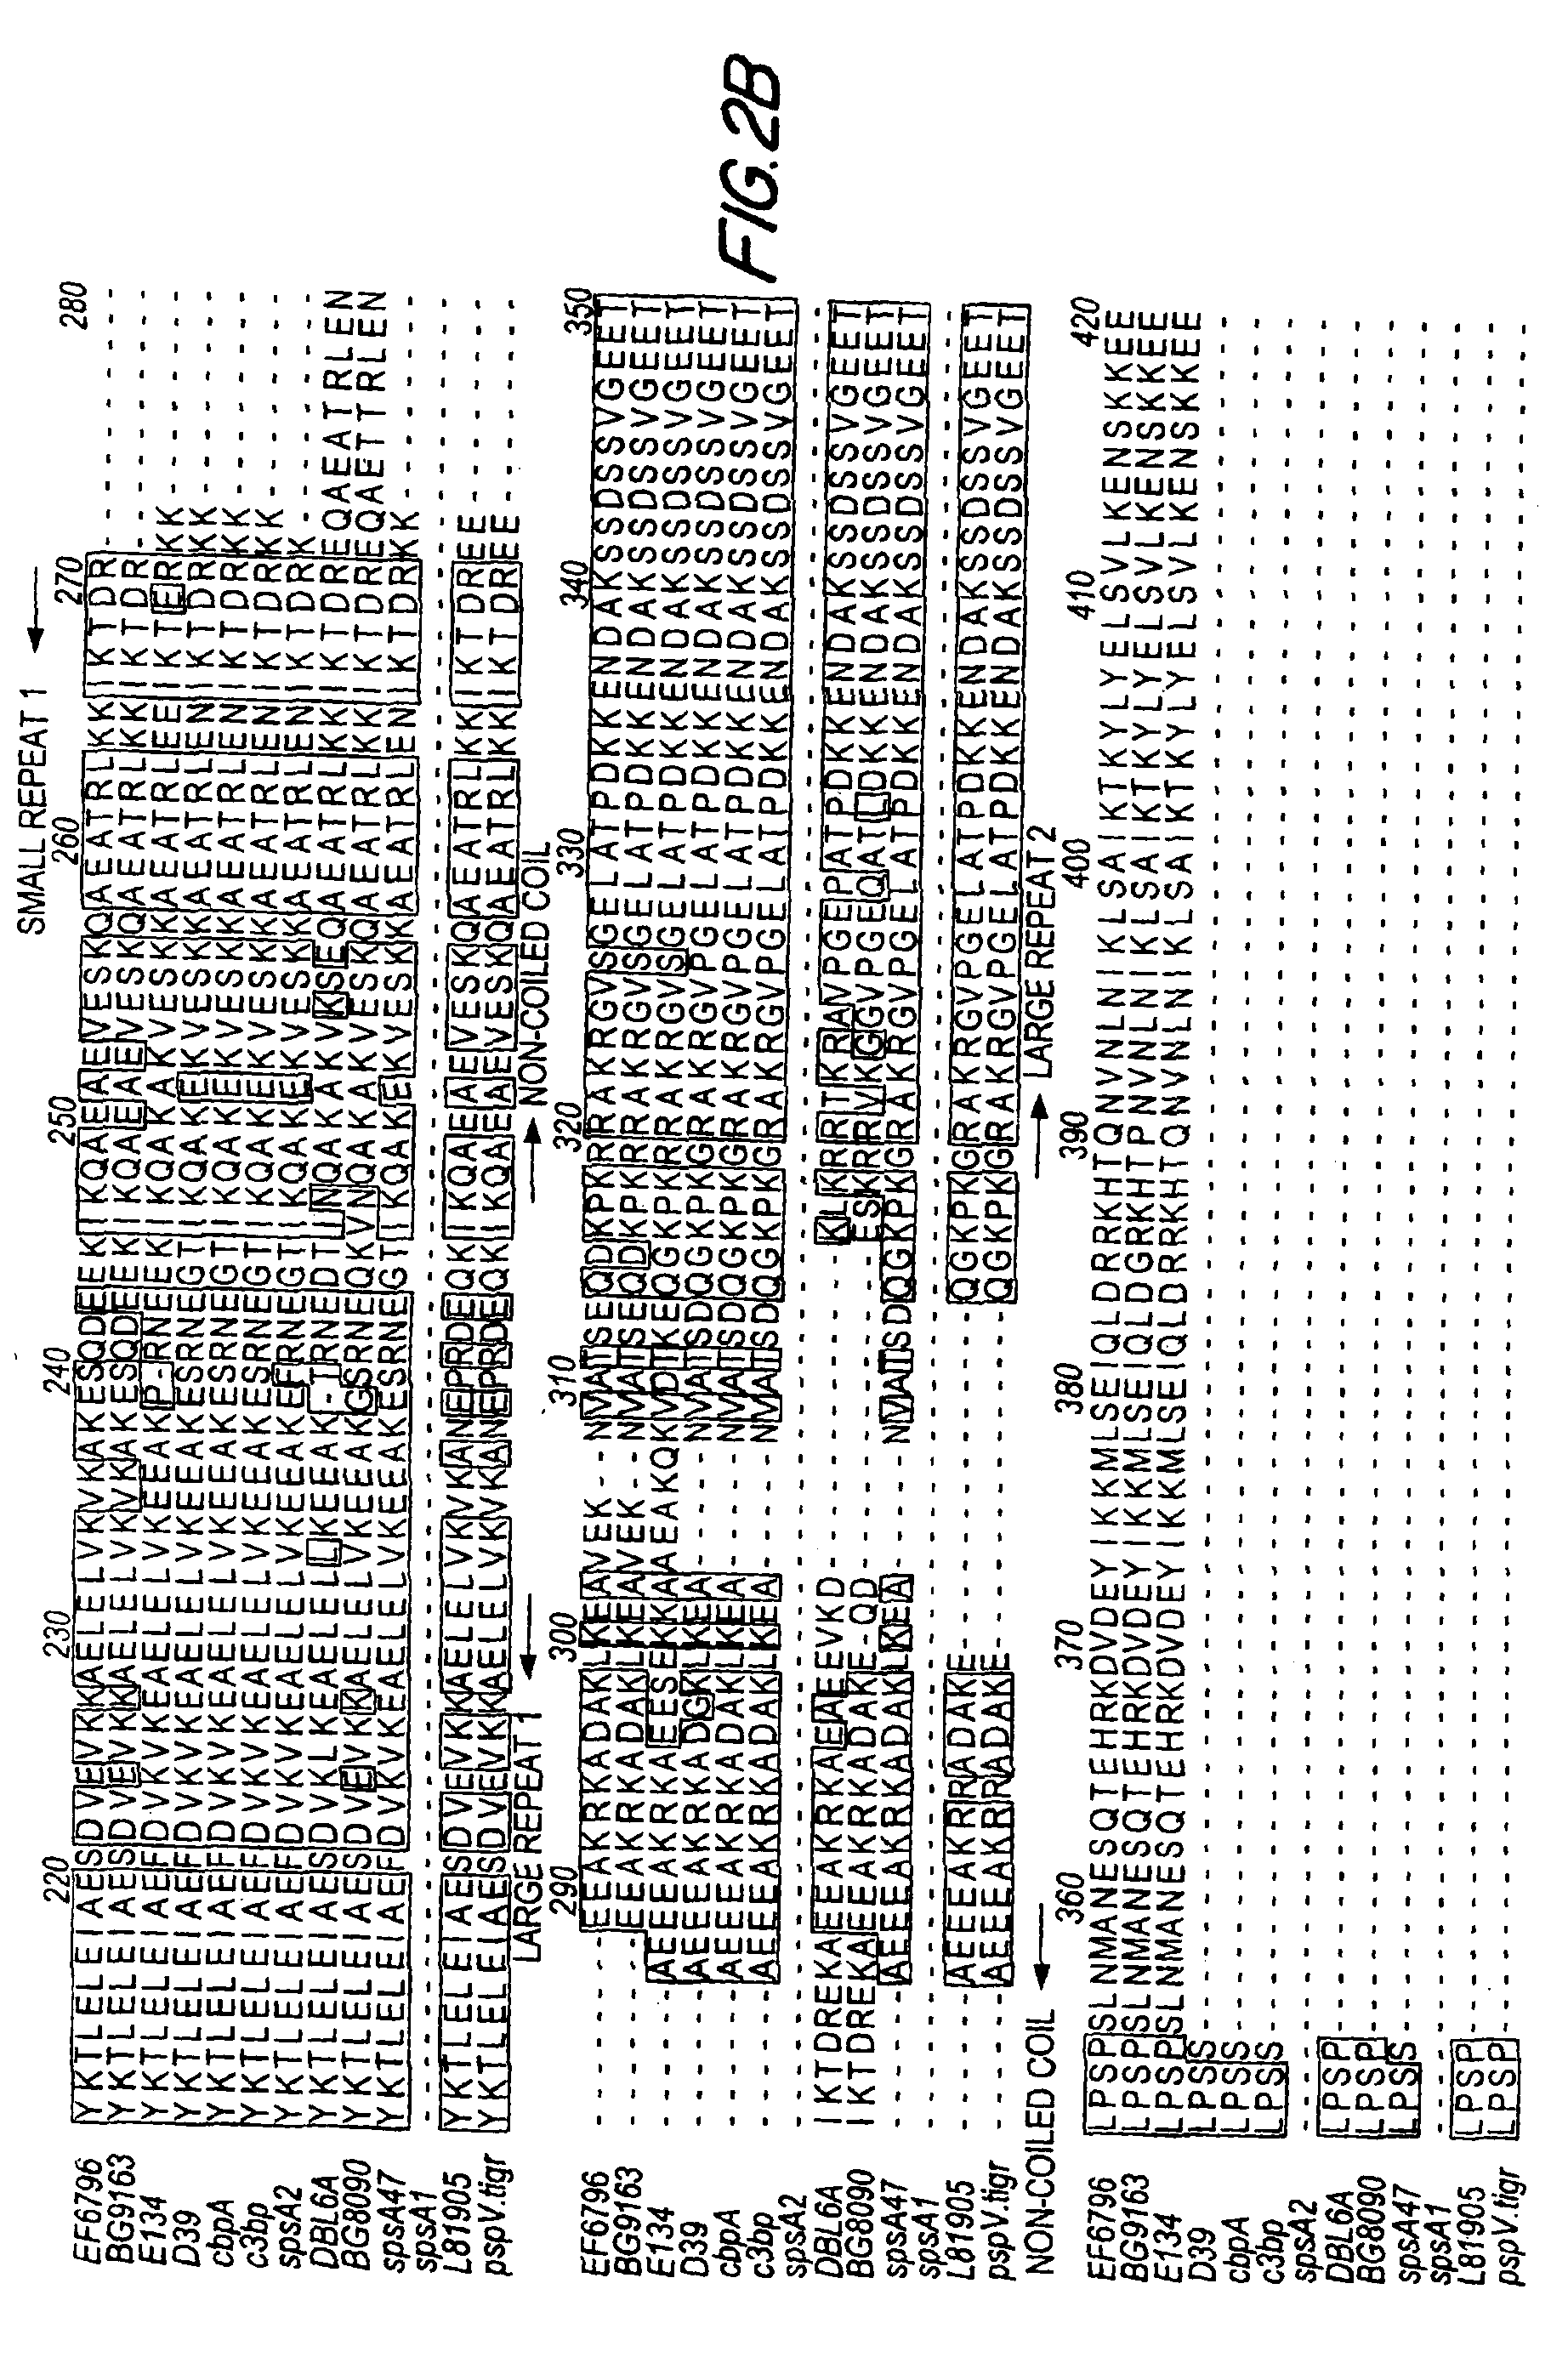 Pneumococcal surface protein C (PspC), epitopic regions and strain selection thereof, and uses therefor